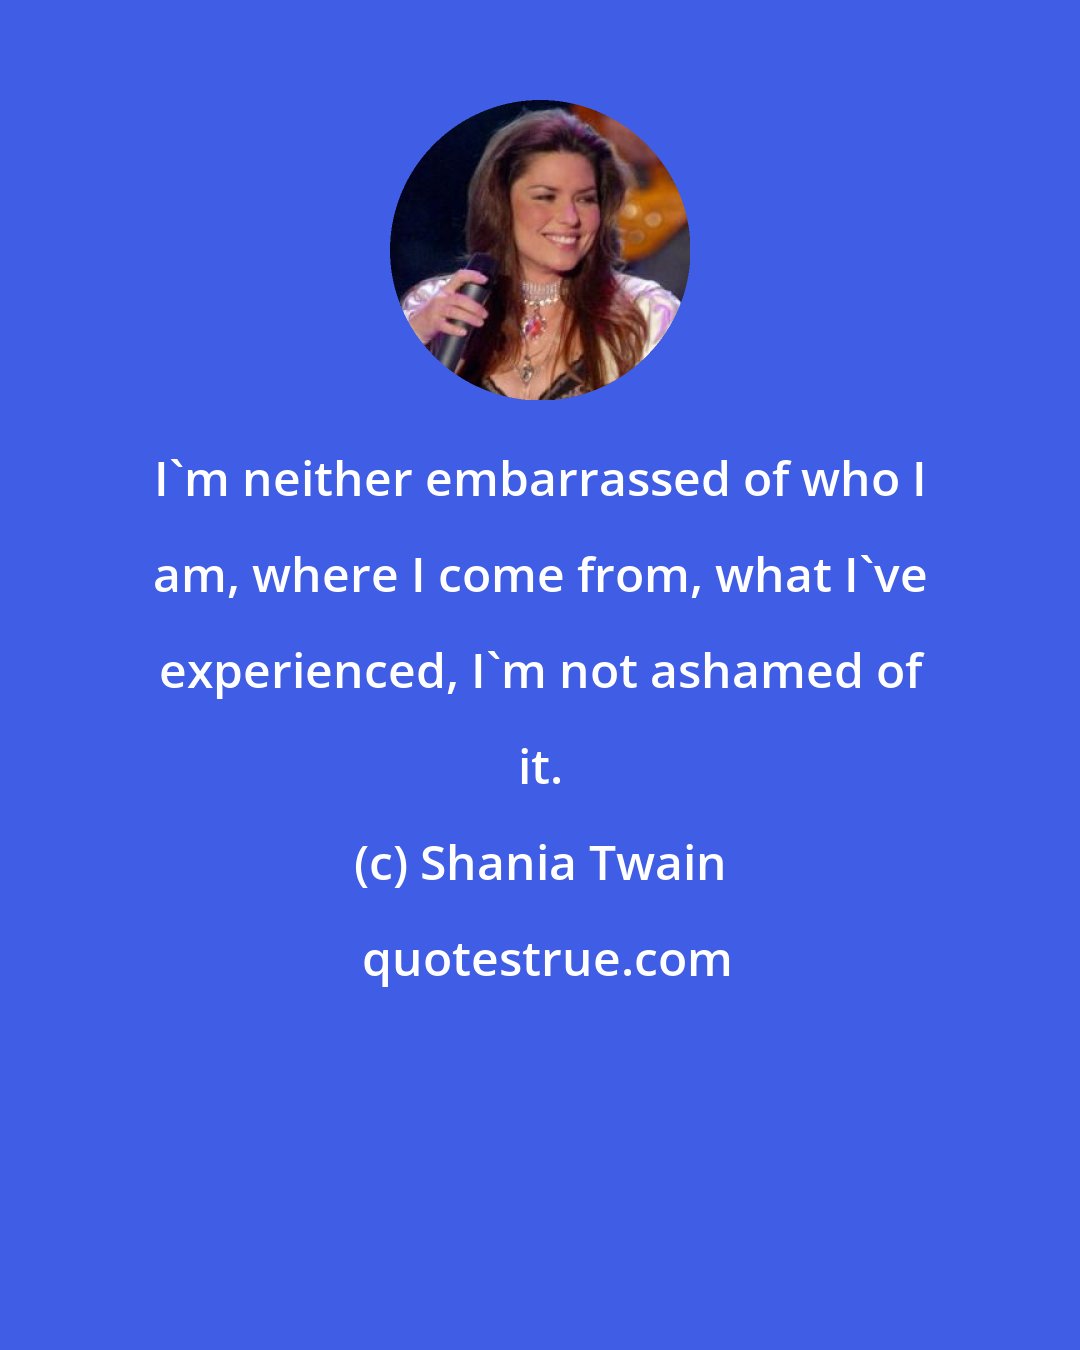 Shania Twain: I'm neither embarrassed of who I am, where I come from, what I've experienced, I'm not ashamed of it.